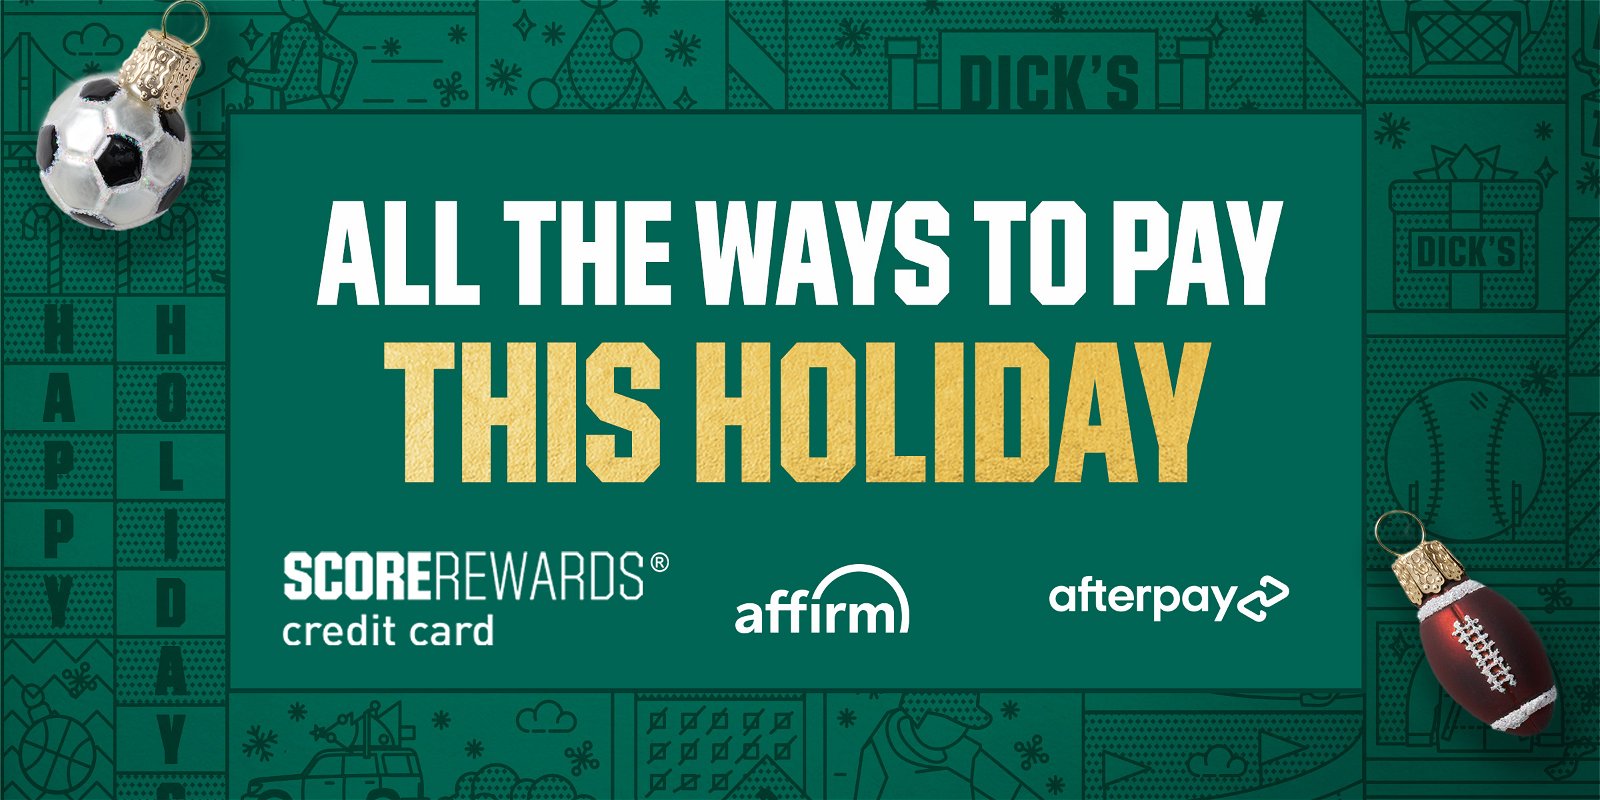 All the ways to pay this holiday. ScoreRewards credit card. Affirm. Afterpay.